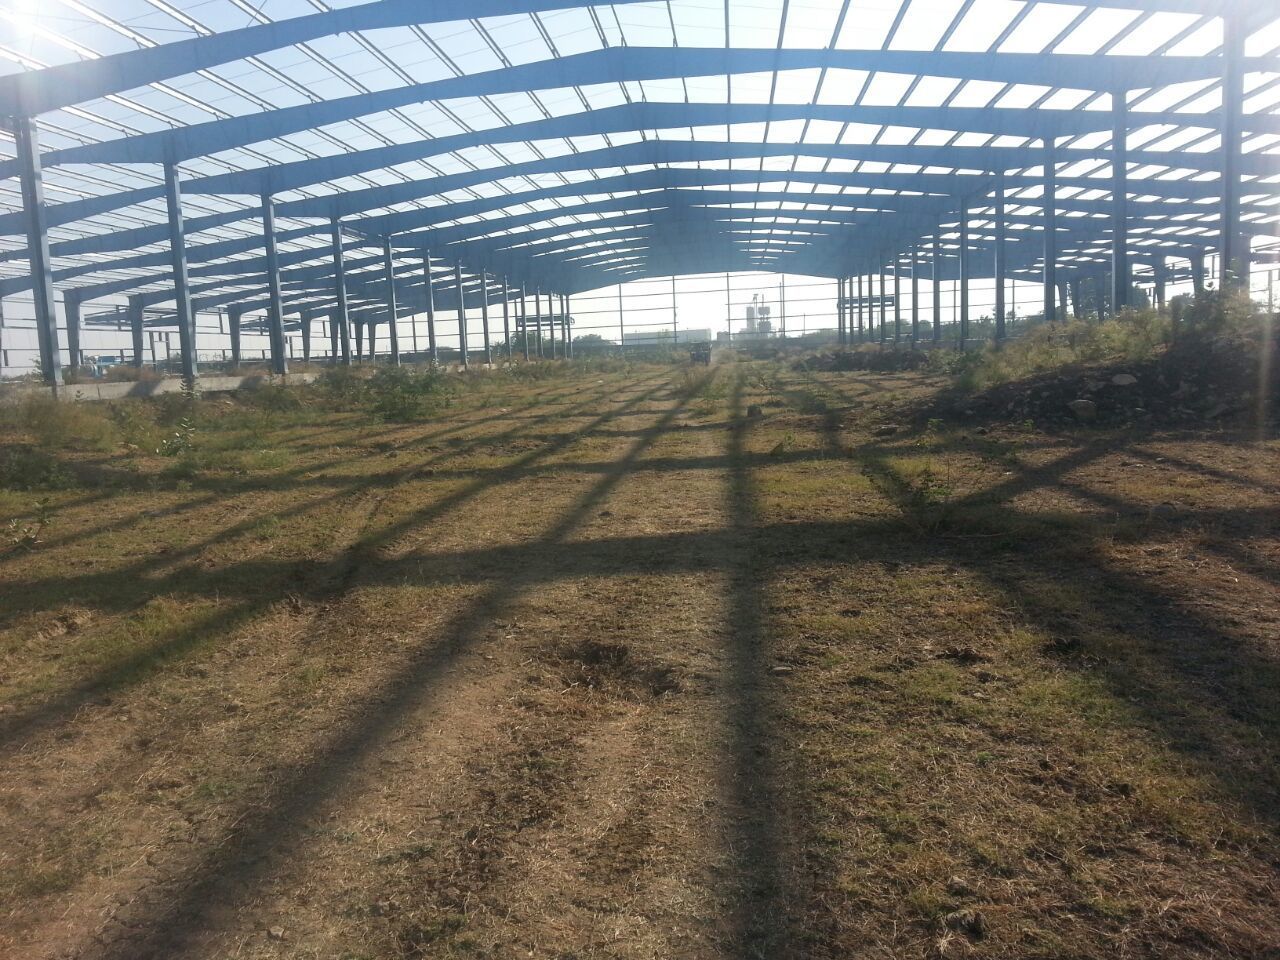 Green house warehouse structure